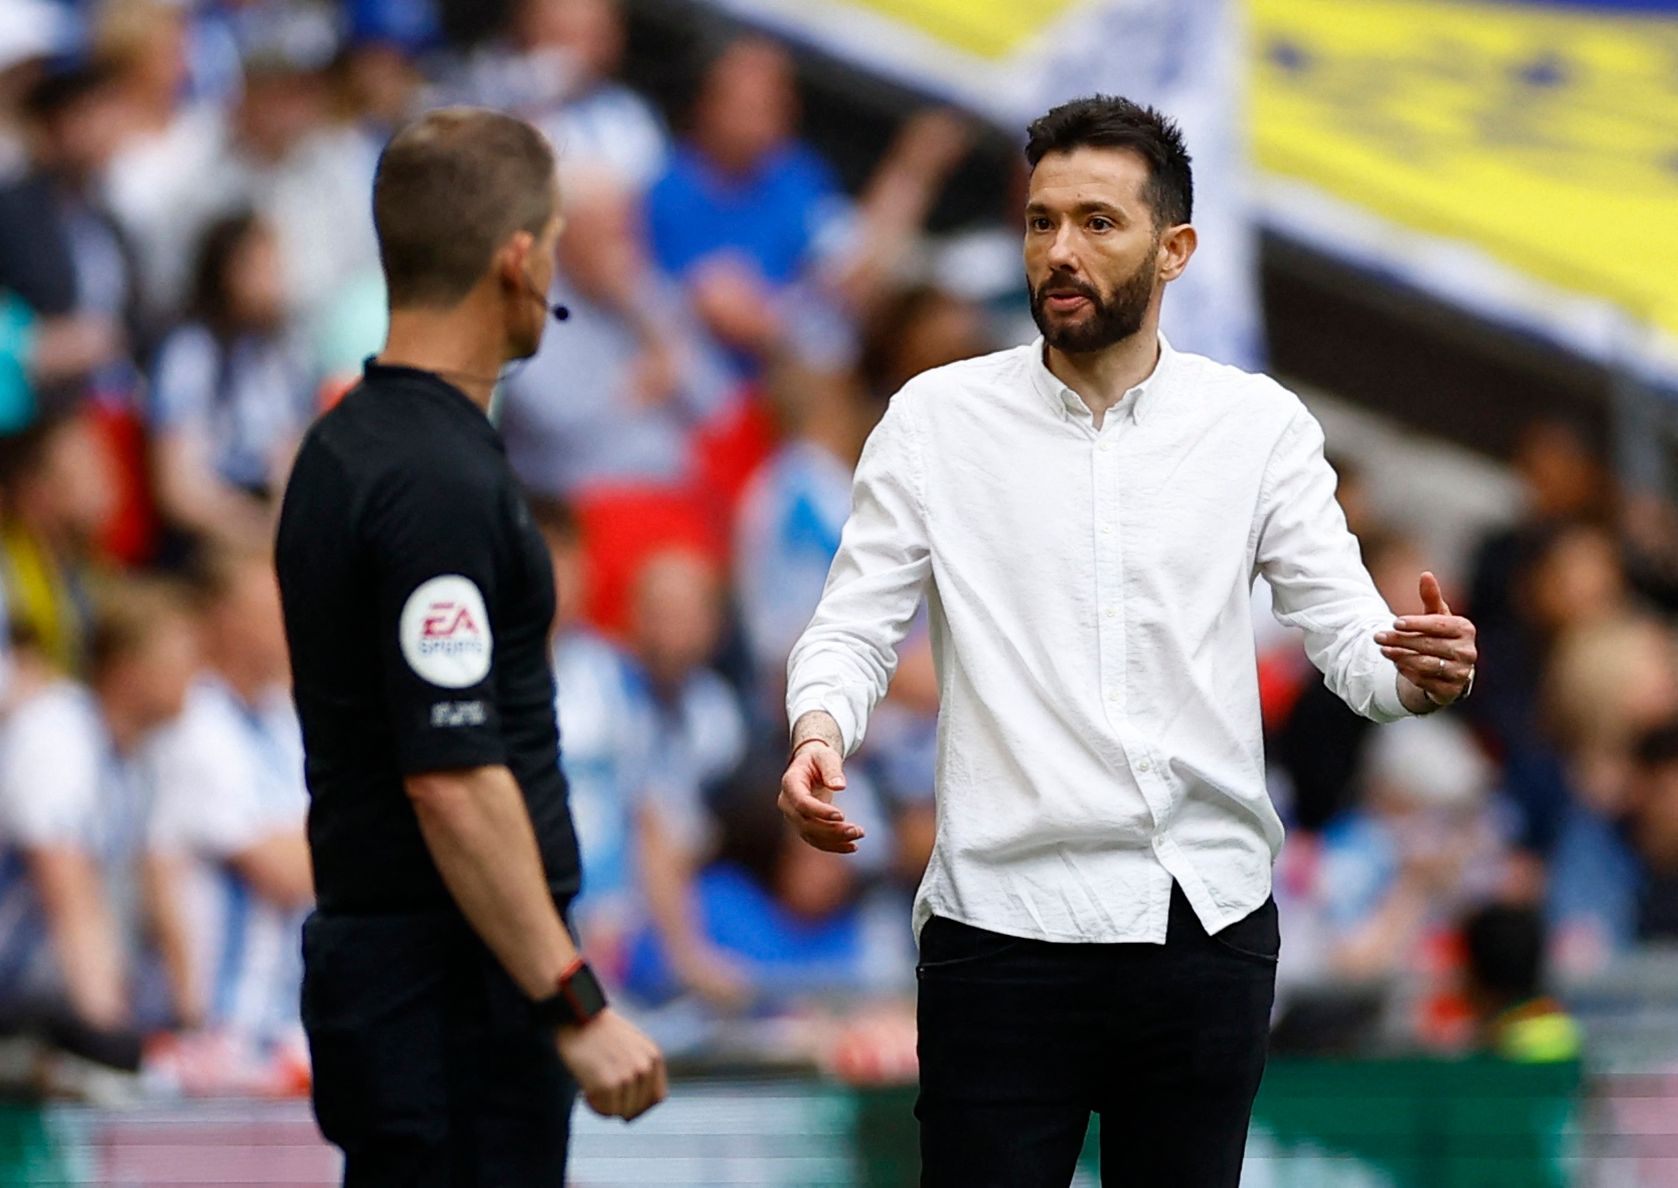 Soccer Football - Championship Play-Off Final - Huddersfield Town v Nottingham Forest - Wembley Stadium, London, Britain - May 29, 2022 Huddersfield Town manager Carlos Corberan Action Images via Reuters/Andrew Boyers